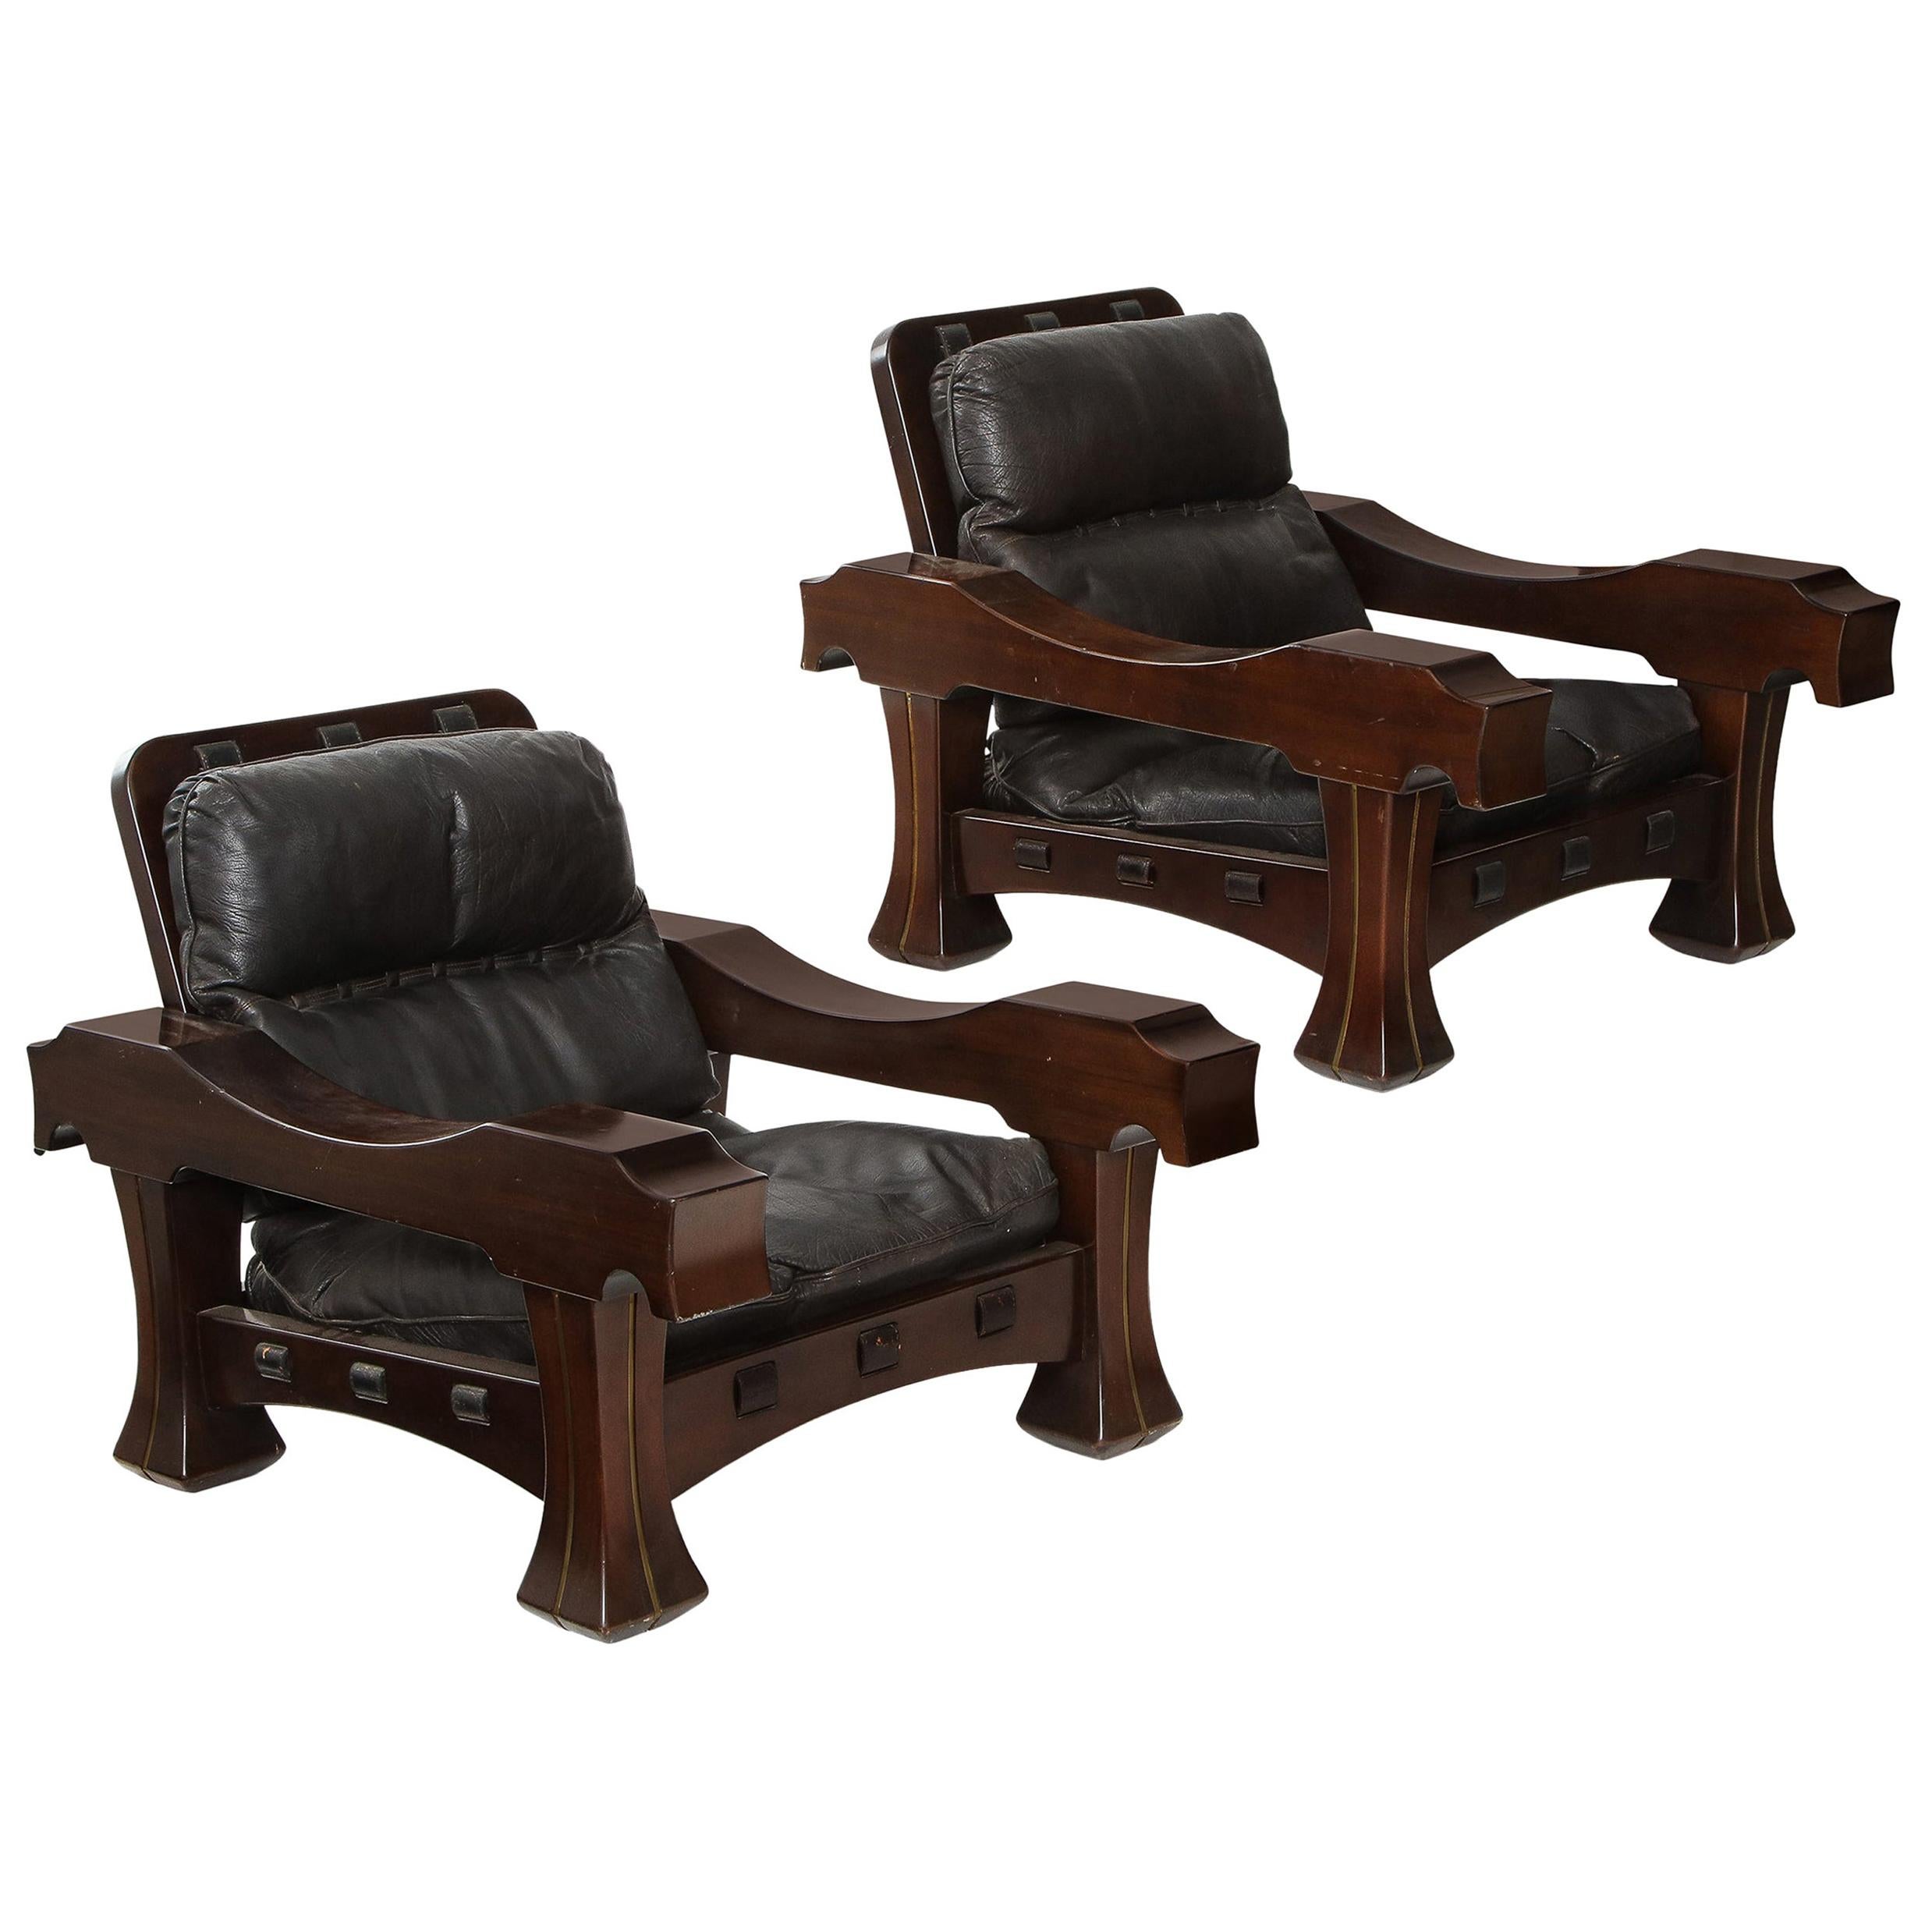 Pair of Ussaro Lounge Chairs by Luciano Frigerio in Leather, Wood and Brass